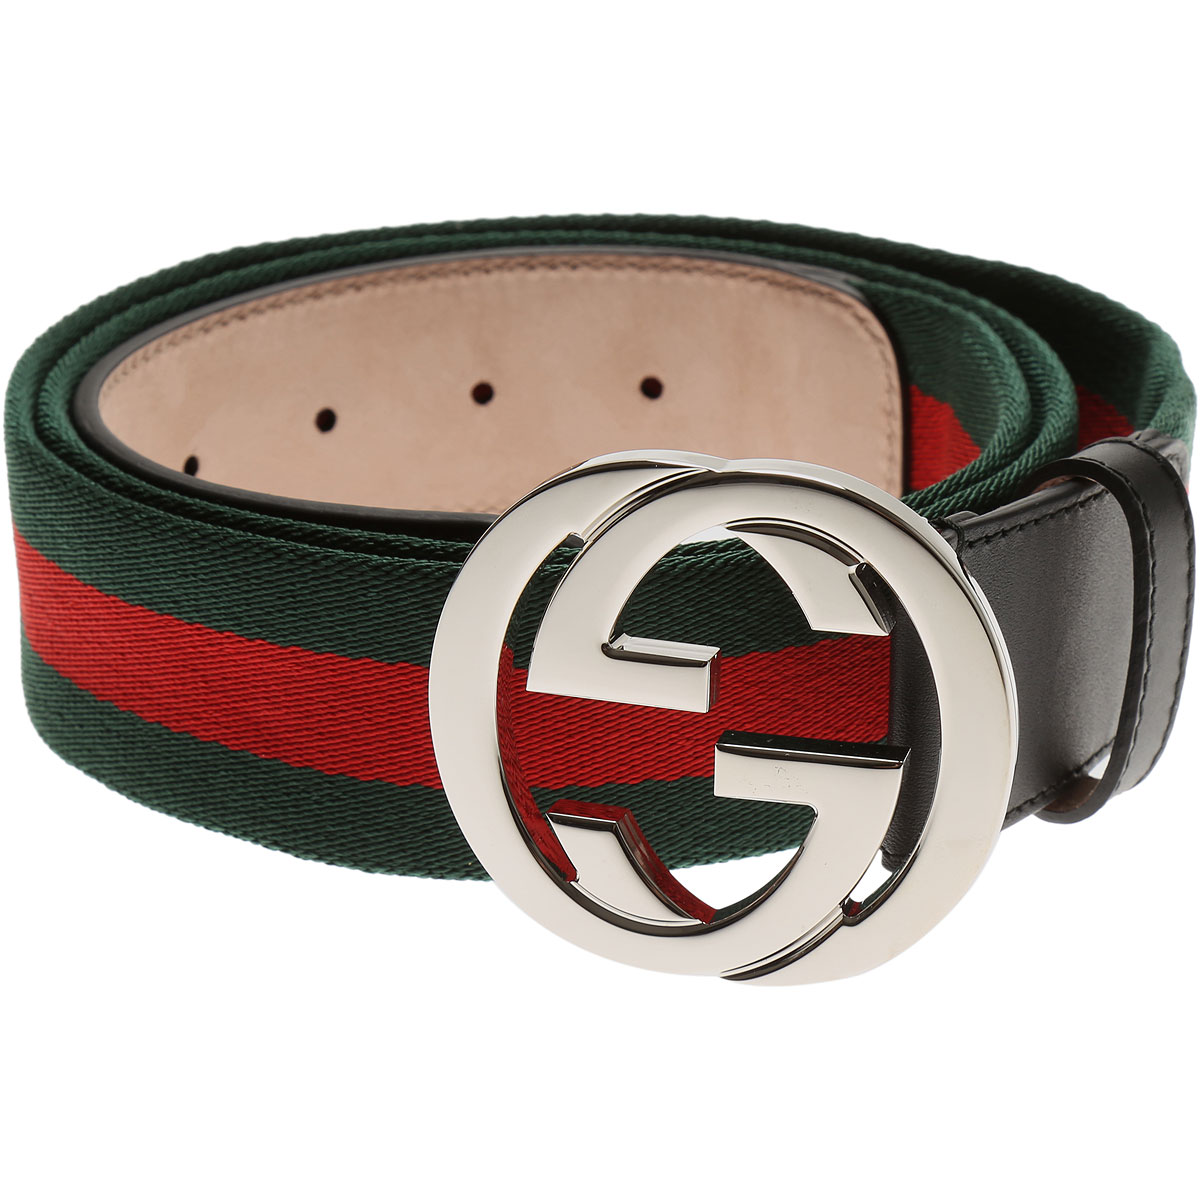 Mens Gucci Belt Outlet | Paul Smith